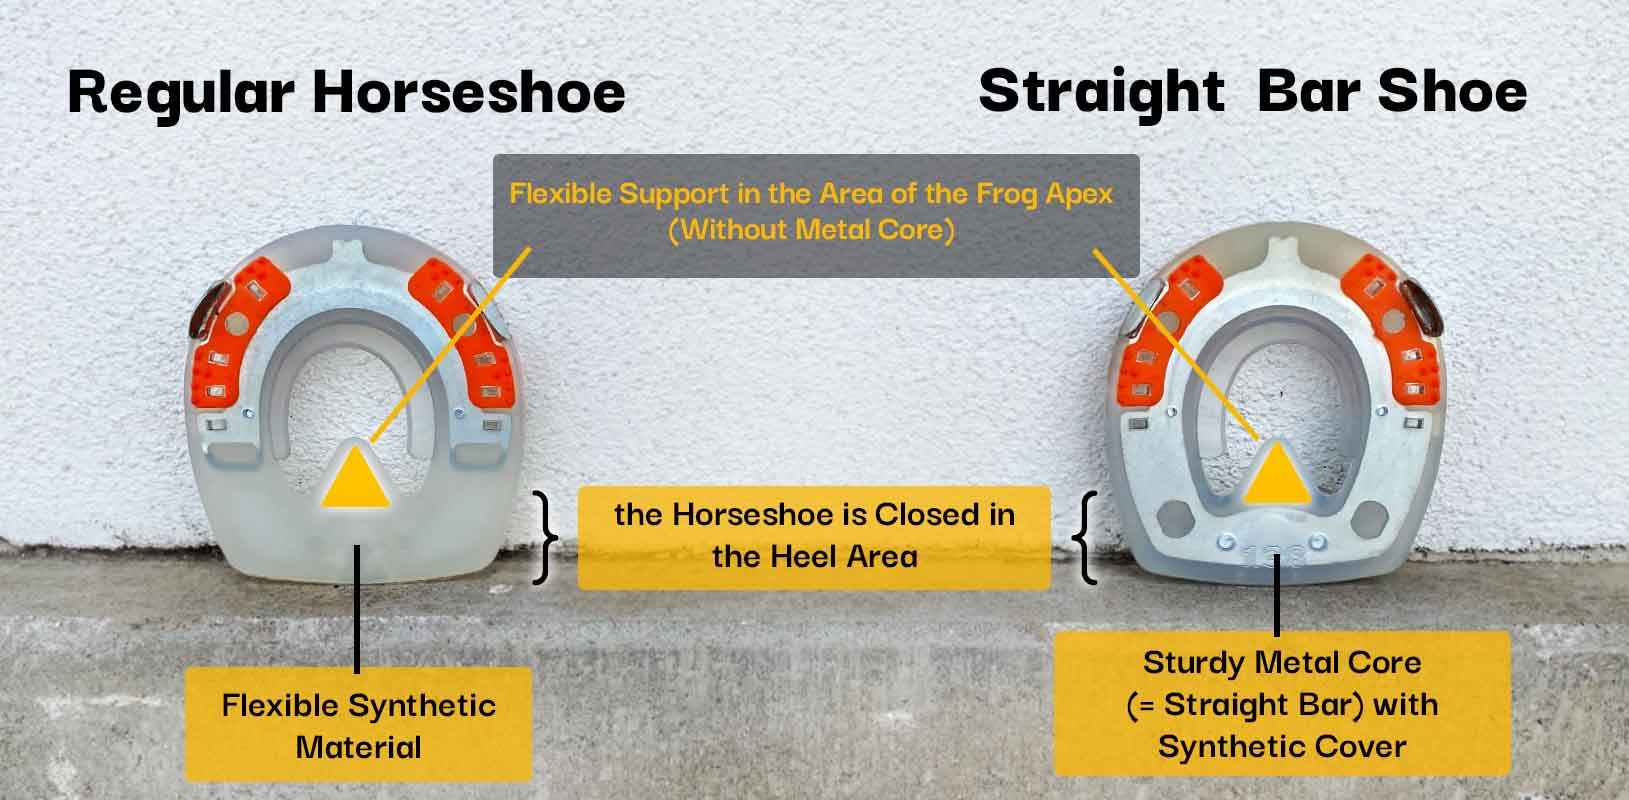 Comparison of Flexible Synthetic Bar and More Sturdy Straight Bar Shoe